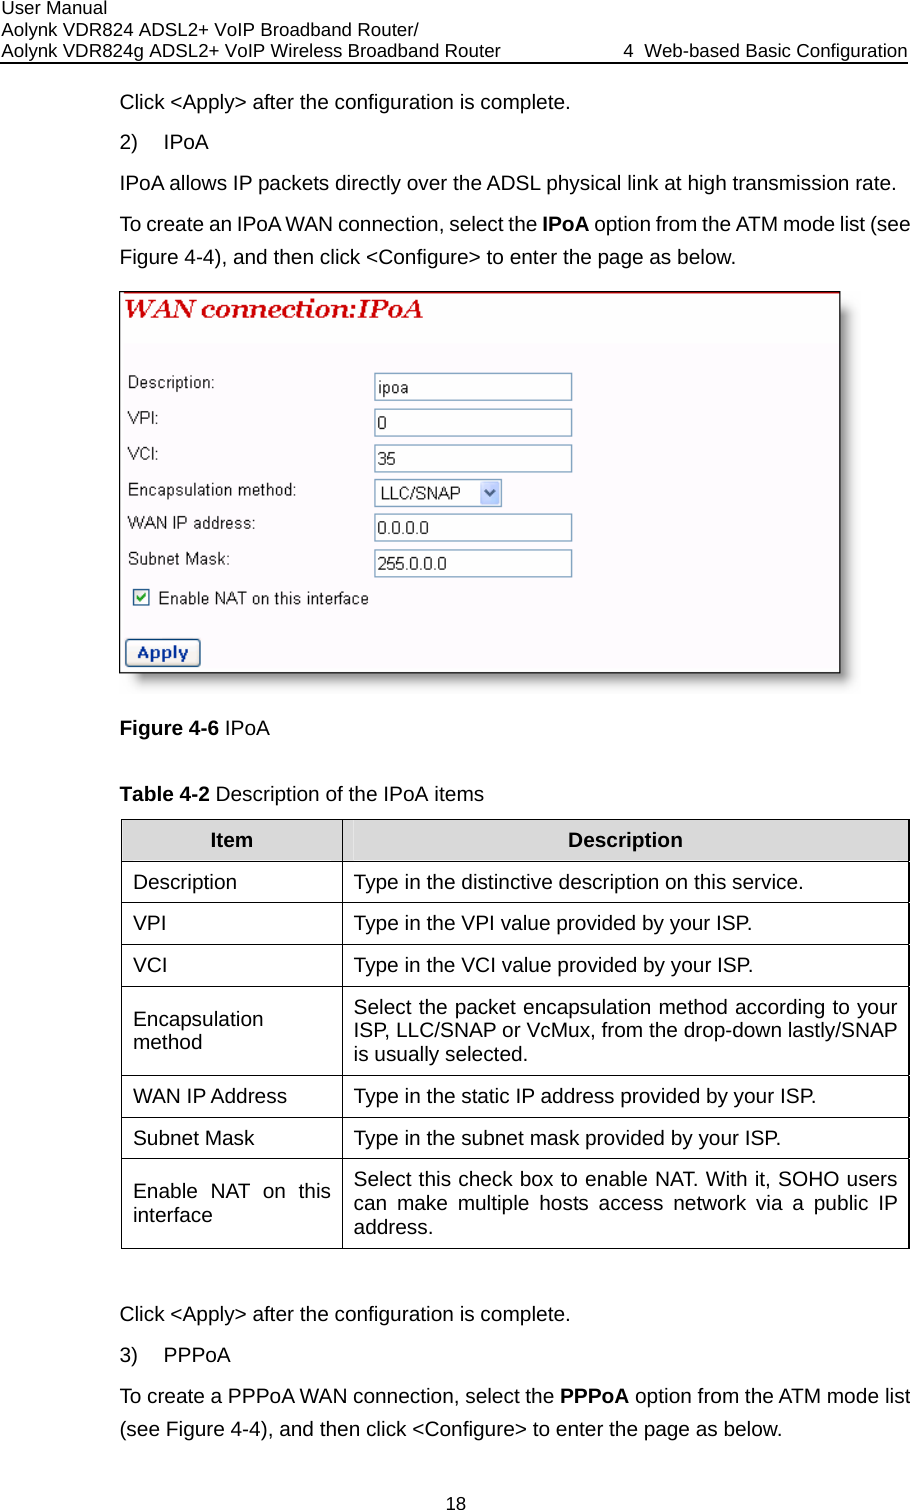 User Manual Aolynk VDR824 ADSL2+ VoIP Broadband Router/ Aolynk VDR824g ADSL2+ VoIP Wireless Broadband Router  4  Web-based Basic Configuration 18  rate. st (see Click &lt;Apply&gt; after the configuration is complete. 2) IPoA IPoA allows IP packets directly over the ADSL physical link at high transmissionTo create an IPoA WAN connection, select the IPoA option from the ATM mode liFigure 4-4), and then click &lt;Configure&gt; to enter the page as below.  FA Table 4-2 Description oigure 4-6 IPof the IPoA items Item  Description Description  Type in the distinctive description on this service. VPI  Type in the VPI value provided by your ISP. VCI  Type in the VCI value provided by your ISP. Encapsulation method  to your Select the packet encapsulation method accordingISP, LLC/SNAP or VcMux, from the drop-down lastly/SNAP is usually selected. WAN IP Address  Type in the static IP address provided by your ISP. Subnet Mask  Type in the subnet mask provided by your ISP. Enable NAT on this interface Select this check box to enable NAT. With it, SOHO users can make multiple hosts access network via a public IP address.  Click &lt;Apply&gt; after the configuration is complete. 3) PPPoA  To create a PPPoA WAN connection, select the PPPoA option from the ATM mode list (see Figure 4-4), and then click &lt;Configure&gt; to enter the page as below. 